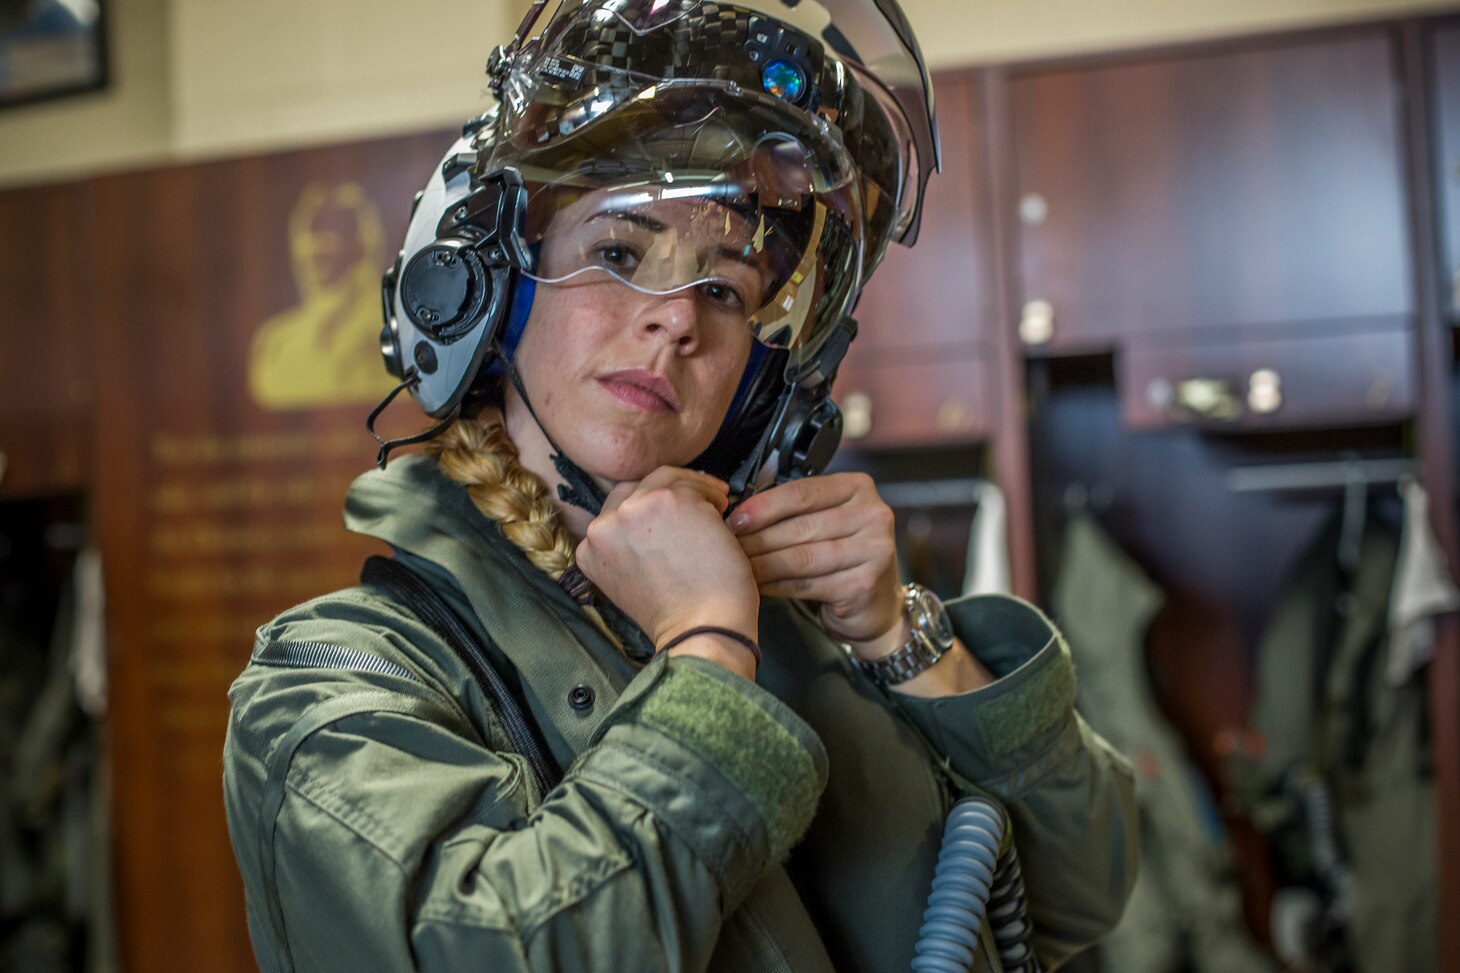 Capt. Anneliese Satz puts on her flight helmet prior to a training flight aboard Marine Corps Air Station Beaufort, March 11. Satz graduated the F-35B Lighting II Pilot Training Program June and will be assigned to Marine Fighter Attack Squadron 121 in Iwakuni, Japan. (U.S. Marine Corps photo by Sgt. Ashley Phillips)